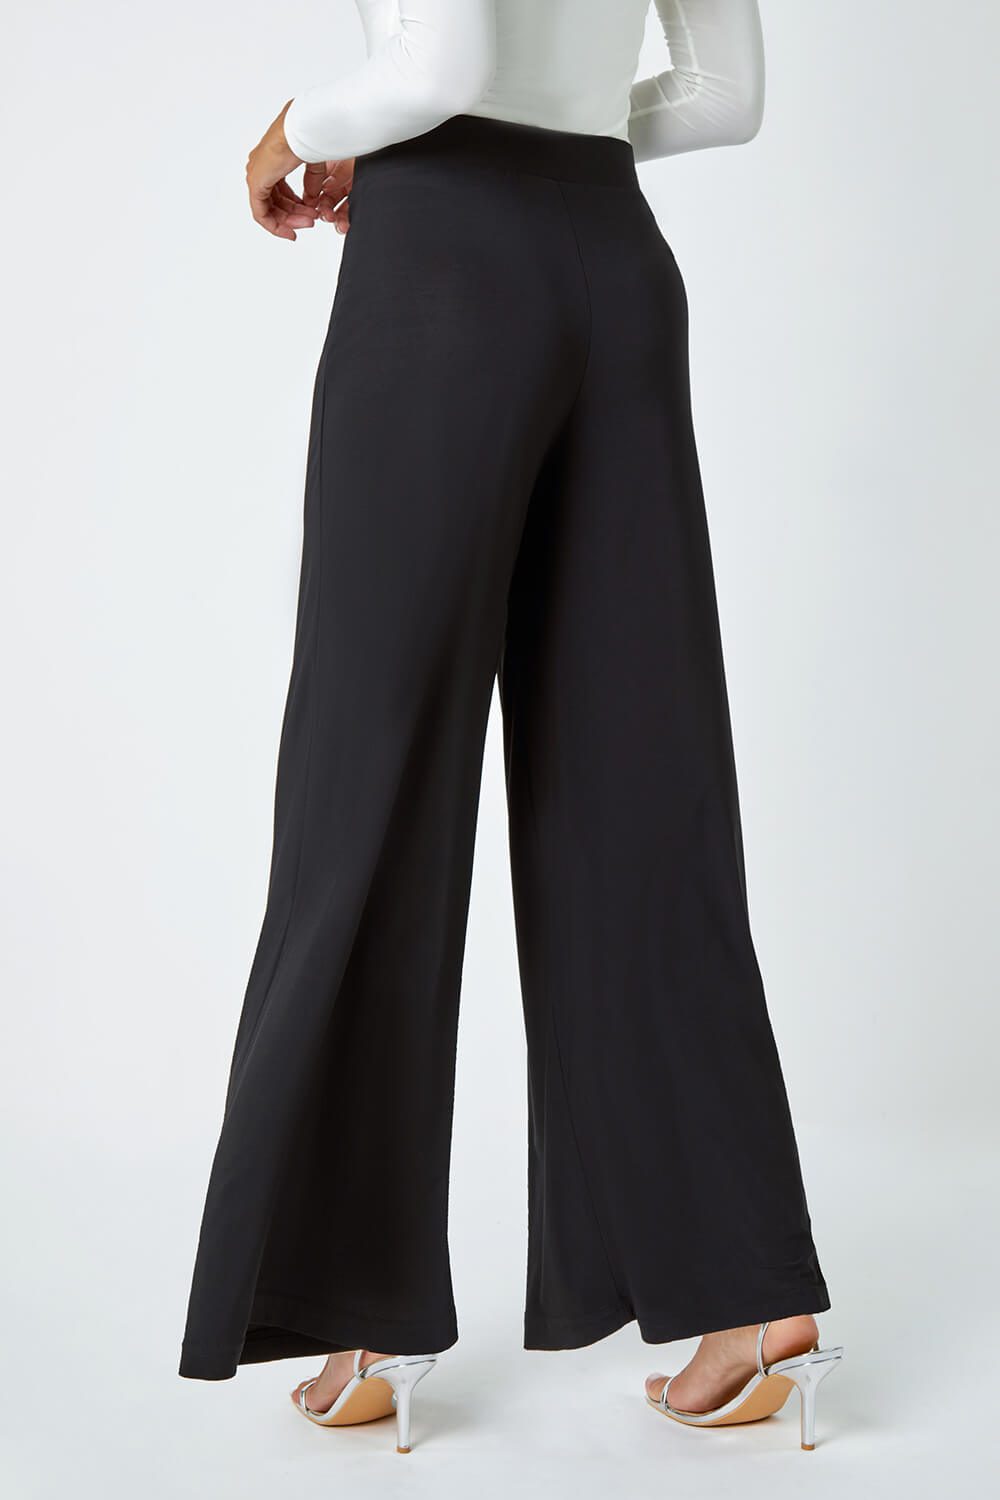 Black Wide Leg Stretch Trousers, Image 3 of 6